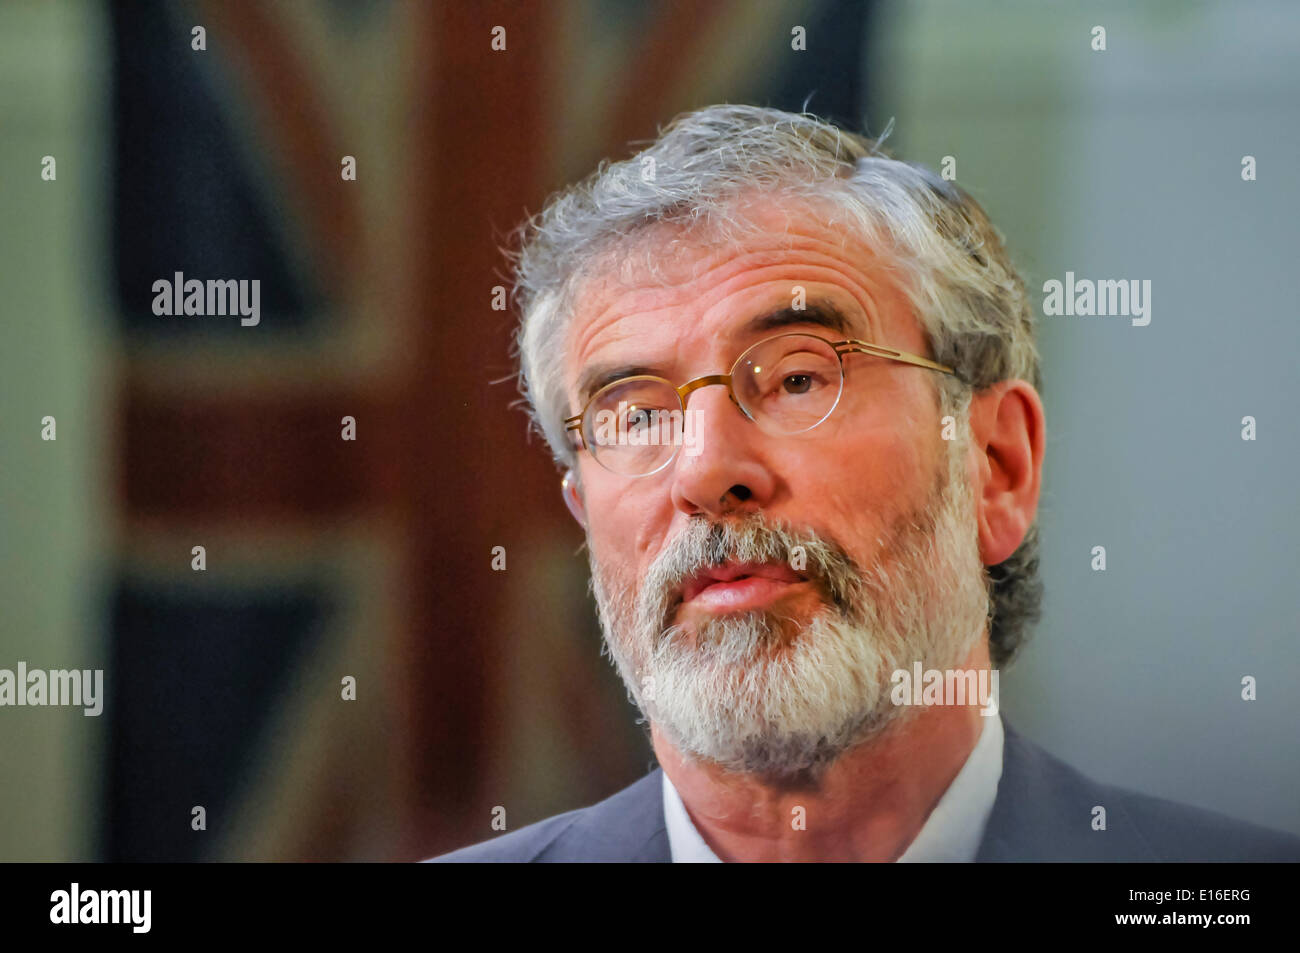 Belfast, Northern Ireland. 24 May 2014 - Sinn Fein President, Gerry Adams (TD for Louth), stands in front of a Union Flag inside Belfast City Hall while he is being interviewed during a live television broadcast Credit:  Stephen Barnes/Alamy Live News Stock Photo